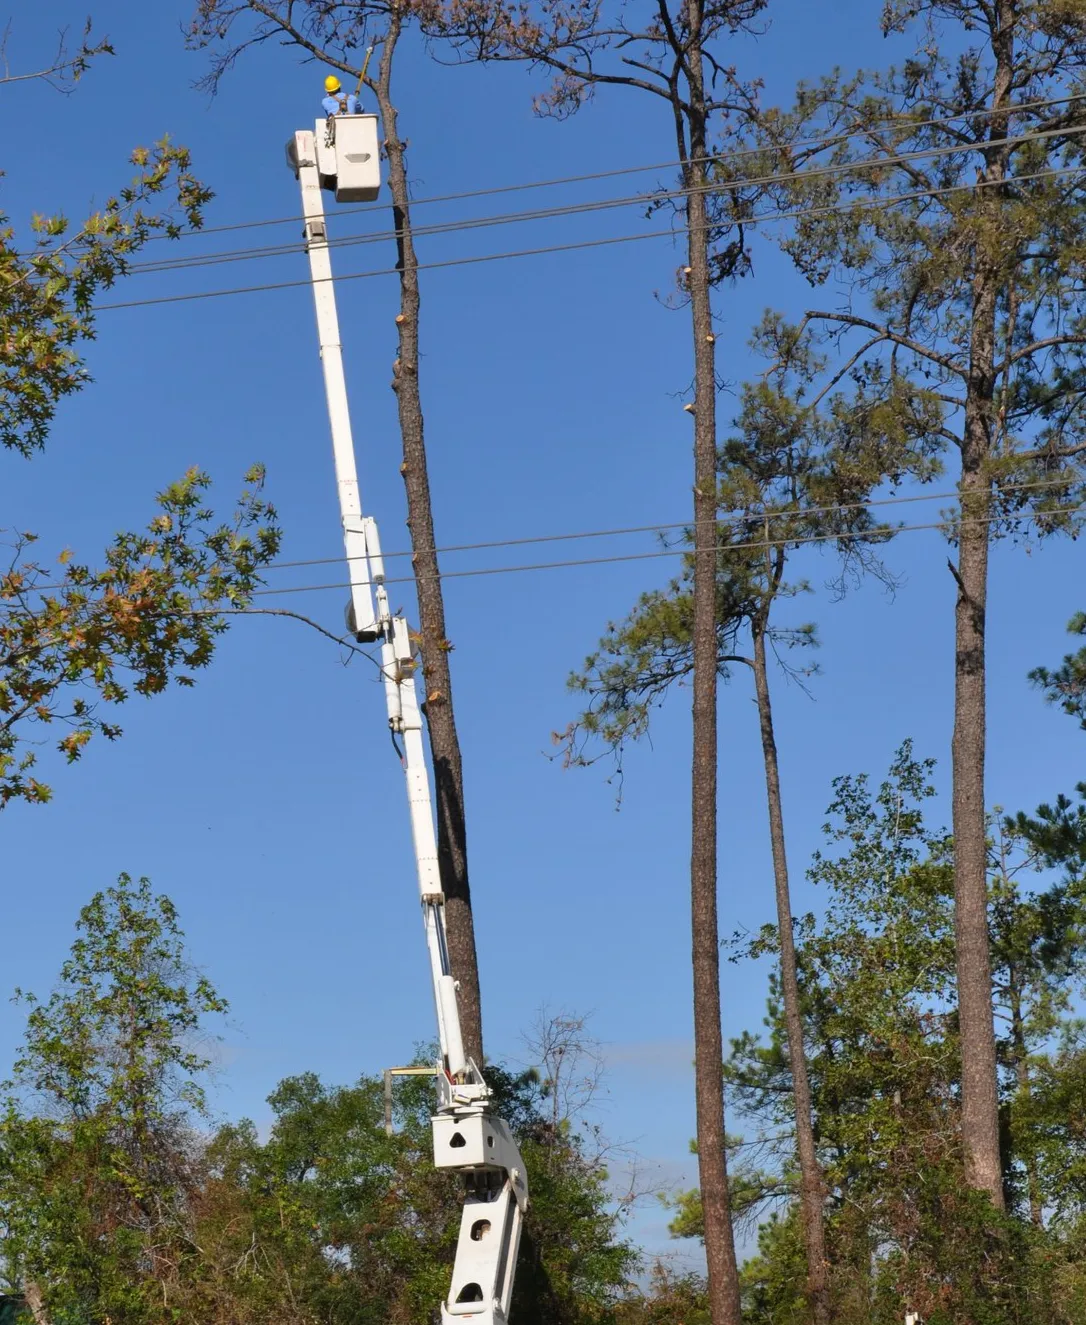 tree trimming performed by a Boca Tree Service arborist